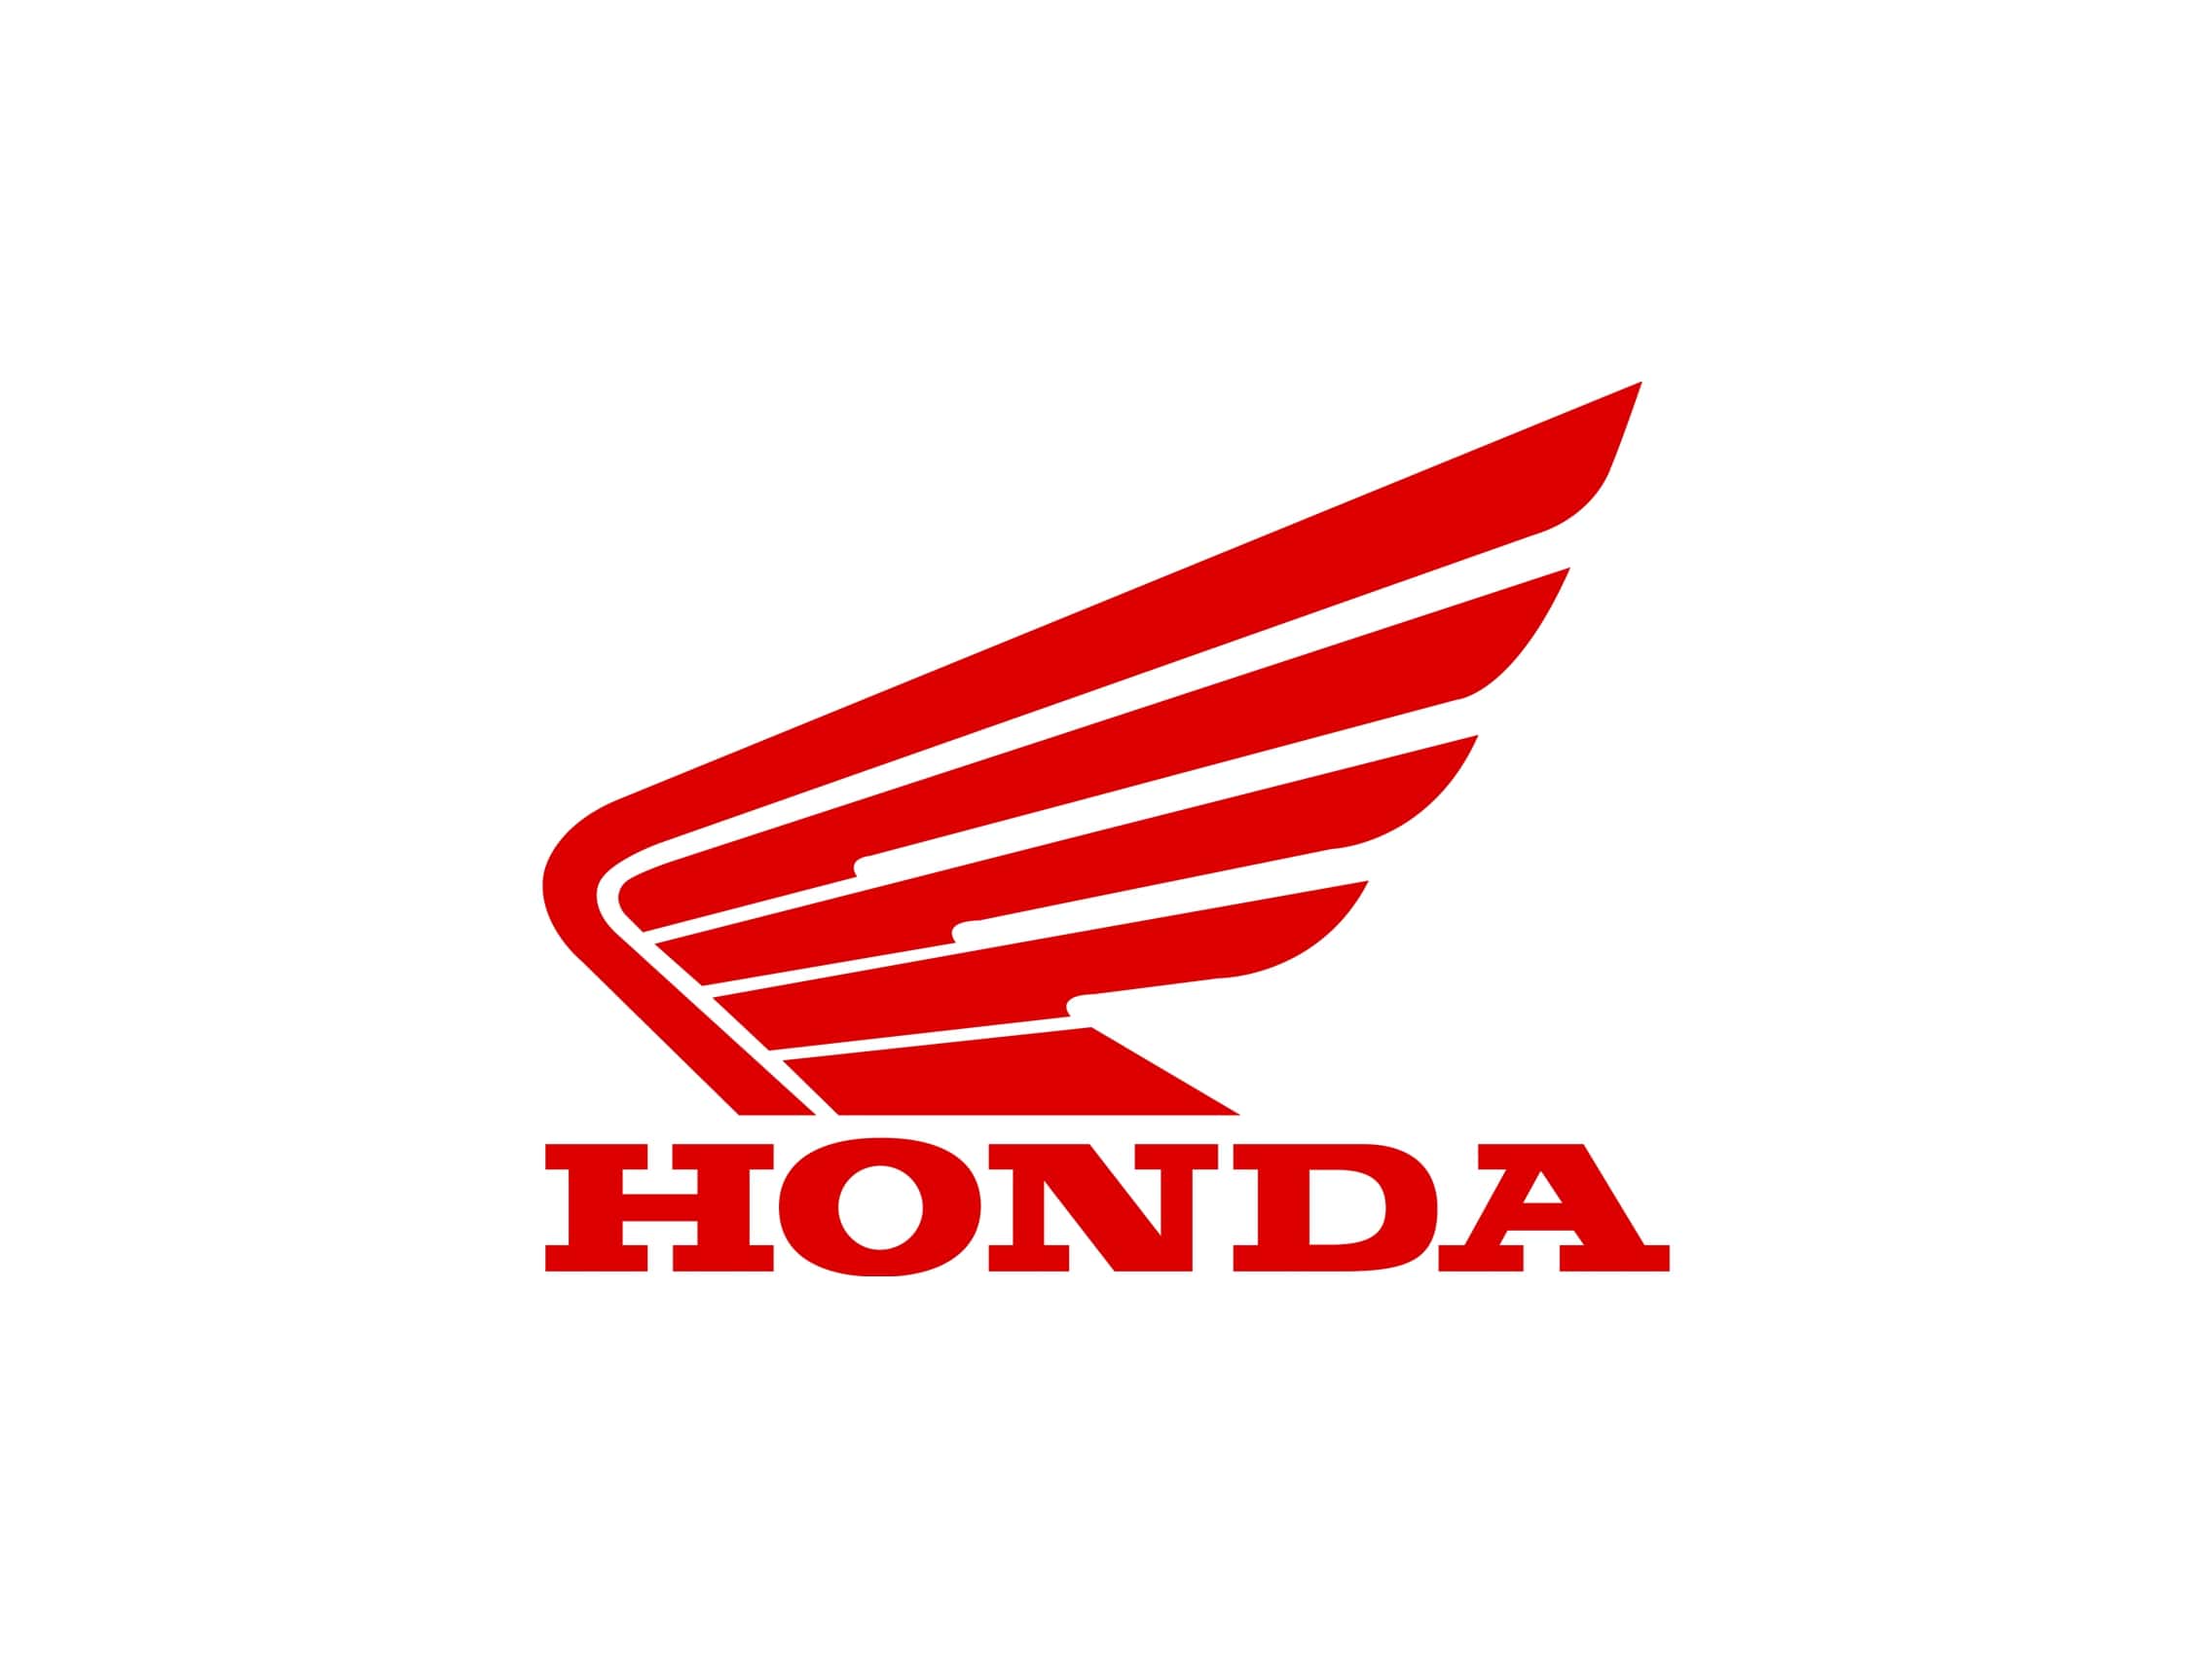 Honda 2Wheelers Becomes First Choice With Over 15 Lakh Customers In Odisha